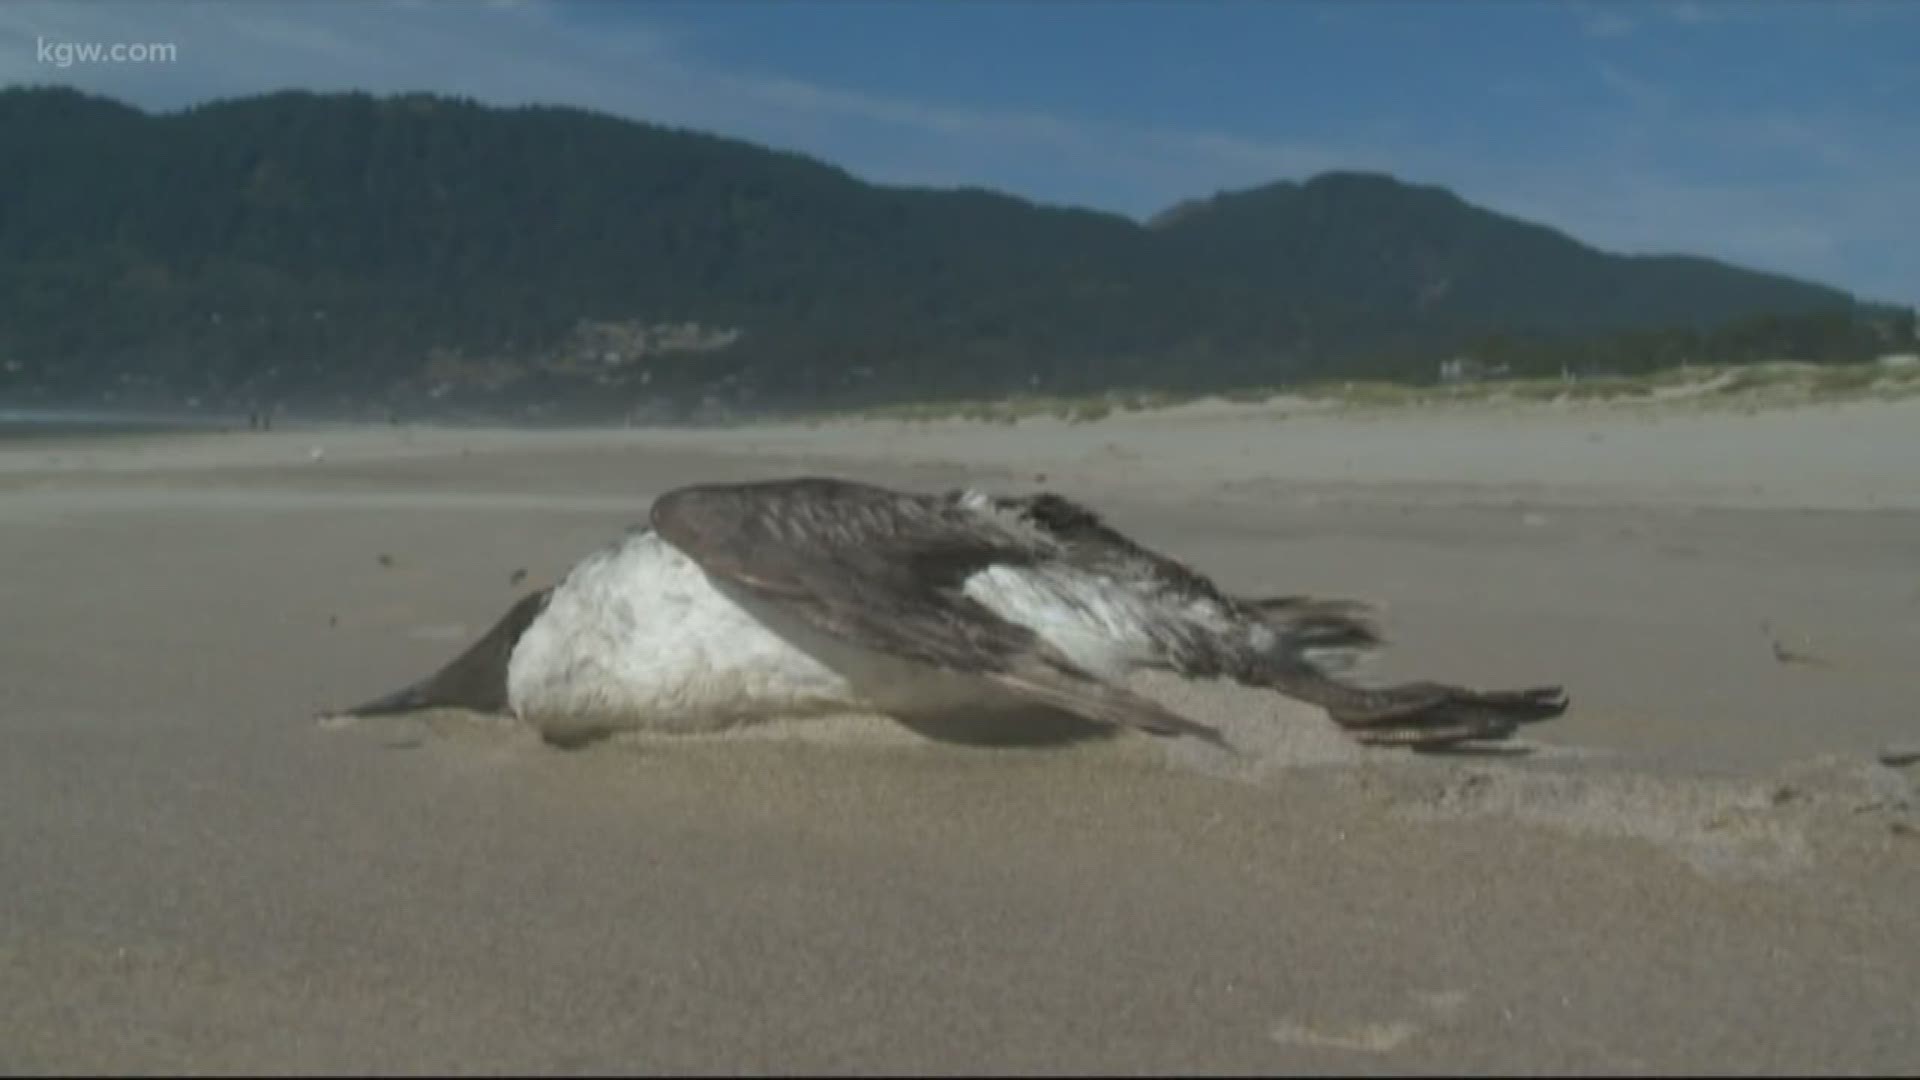 Researchers have linked a massive die-off of seabirds along the West Coast in 2015 and 2016 back to an ocean phenomenon called "the blob."